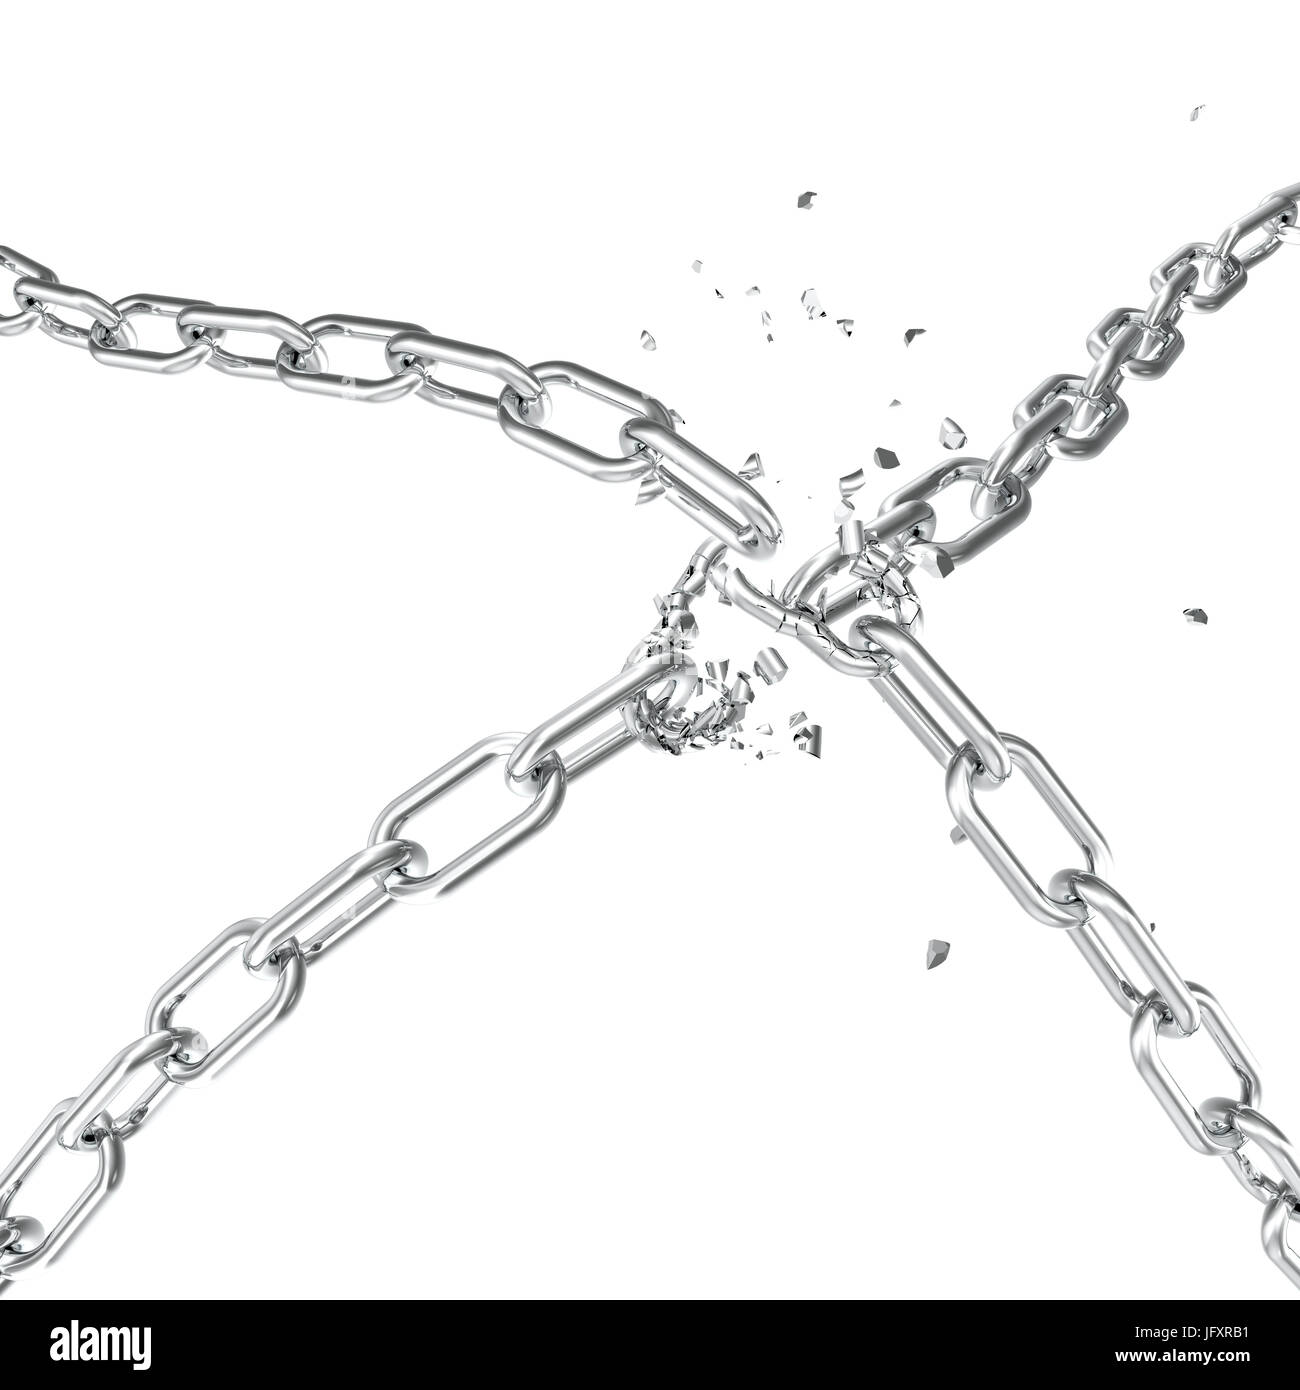 Industrial chain. Bright metal chain (?stainless steel) on